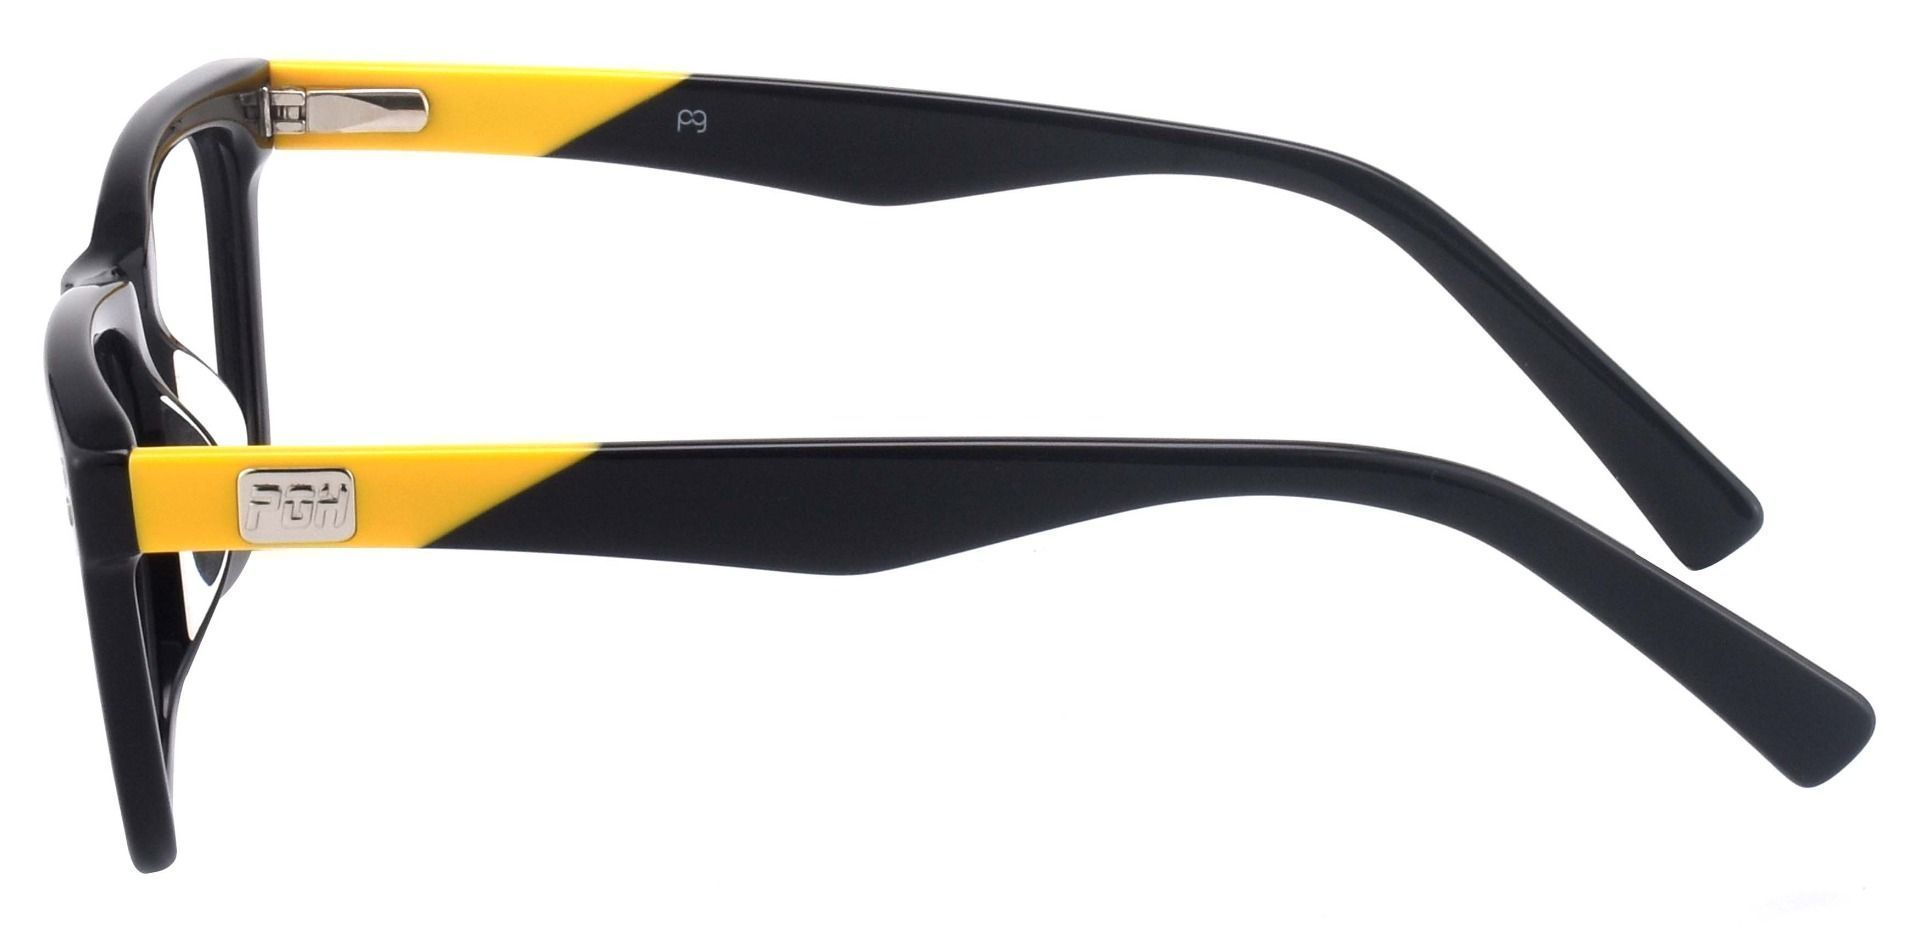 Liberty Rectangle Eyeglasses Frame - The Frame Is Black And Gold